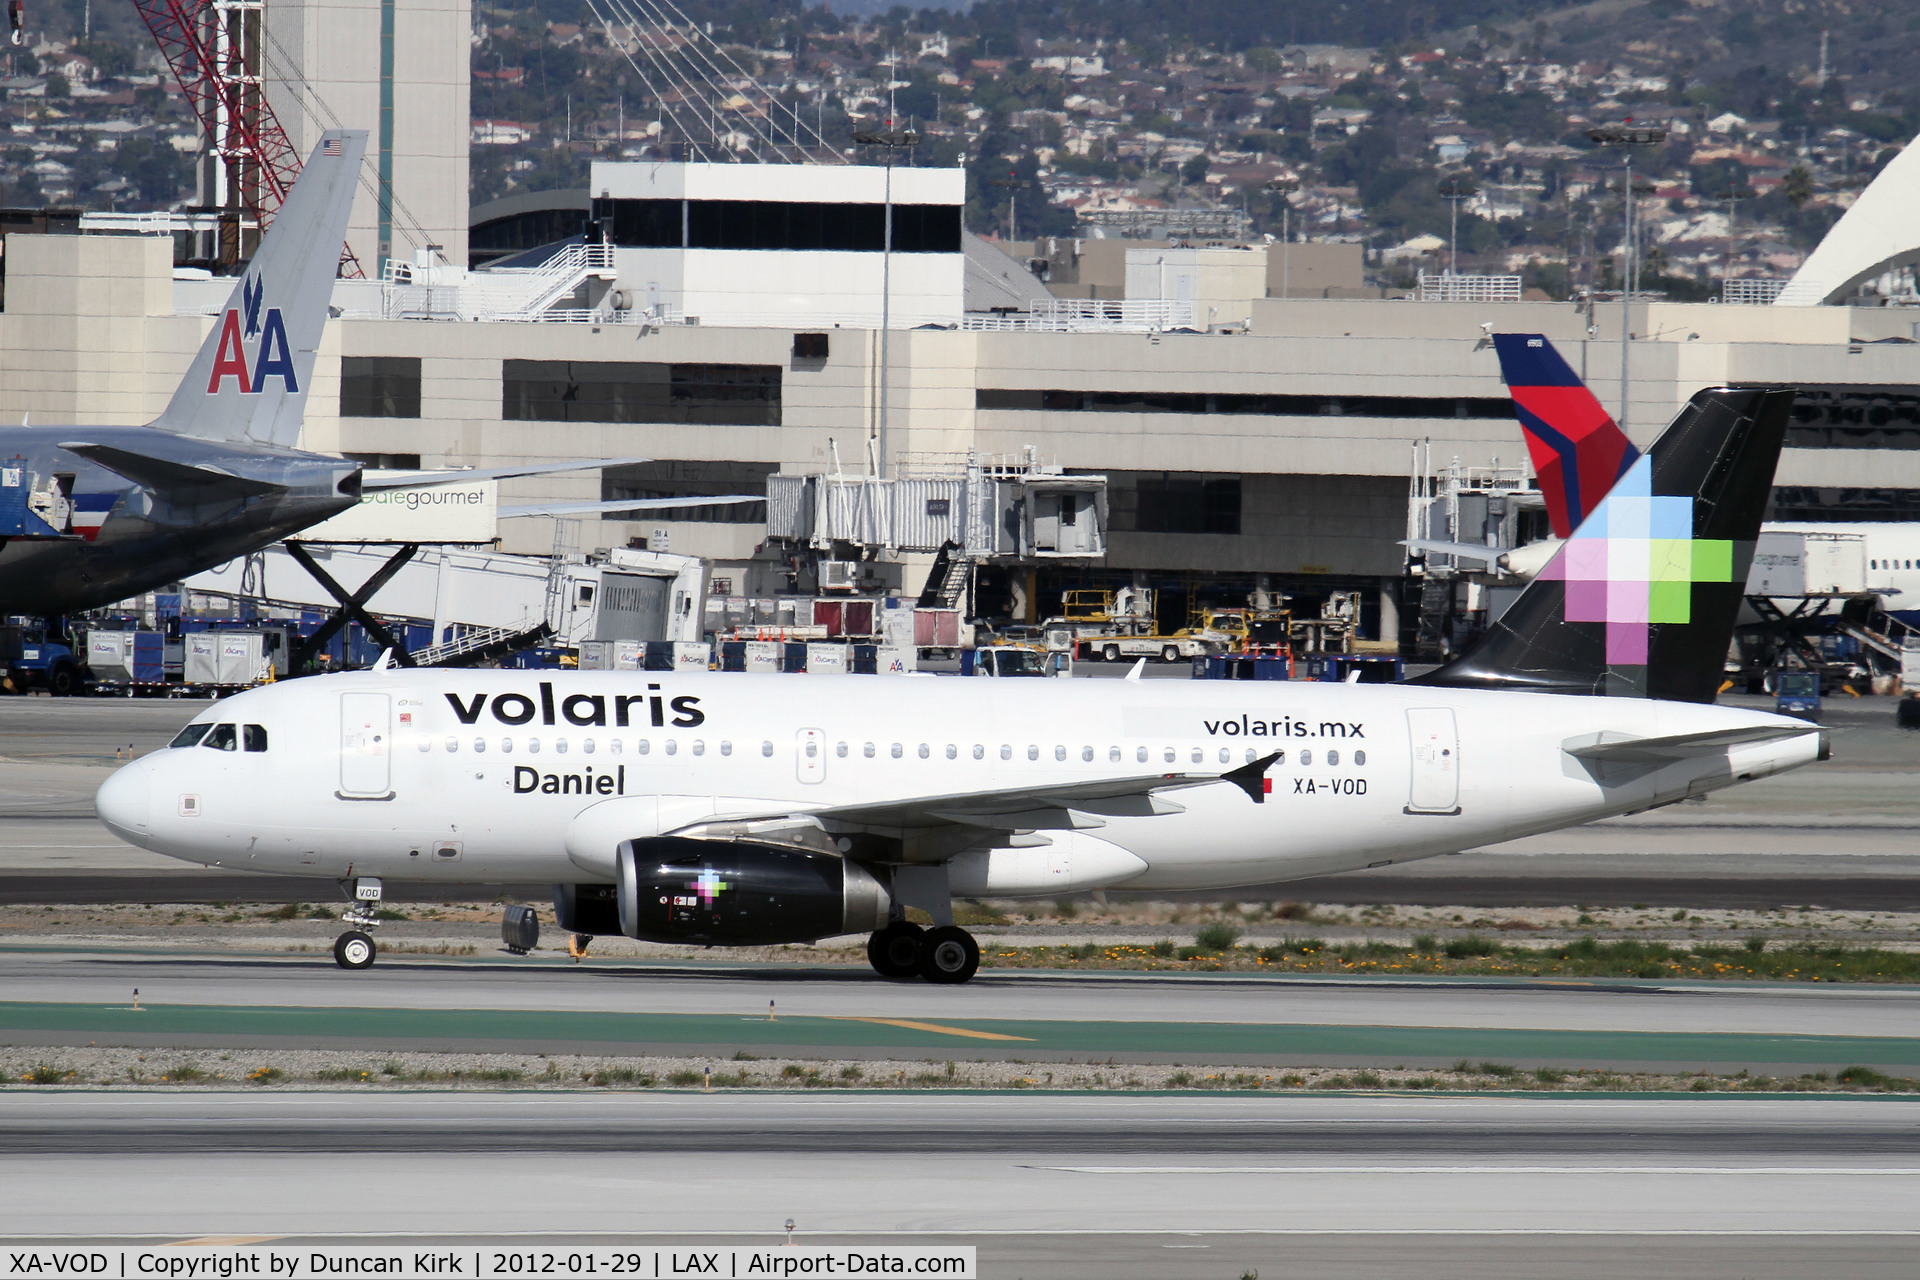 XA-VOD, 2007 Airbus A319-133 C/N 3045, Volaris scheduled arrival at LAX